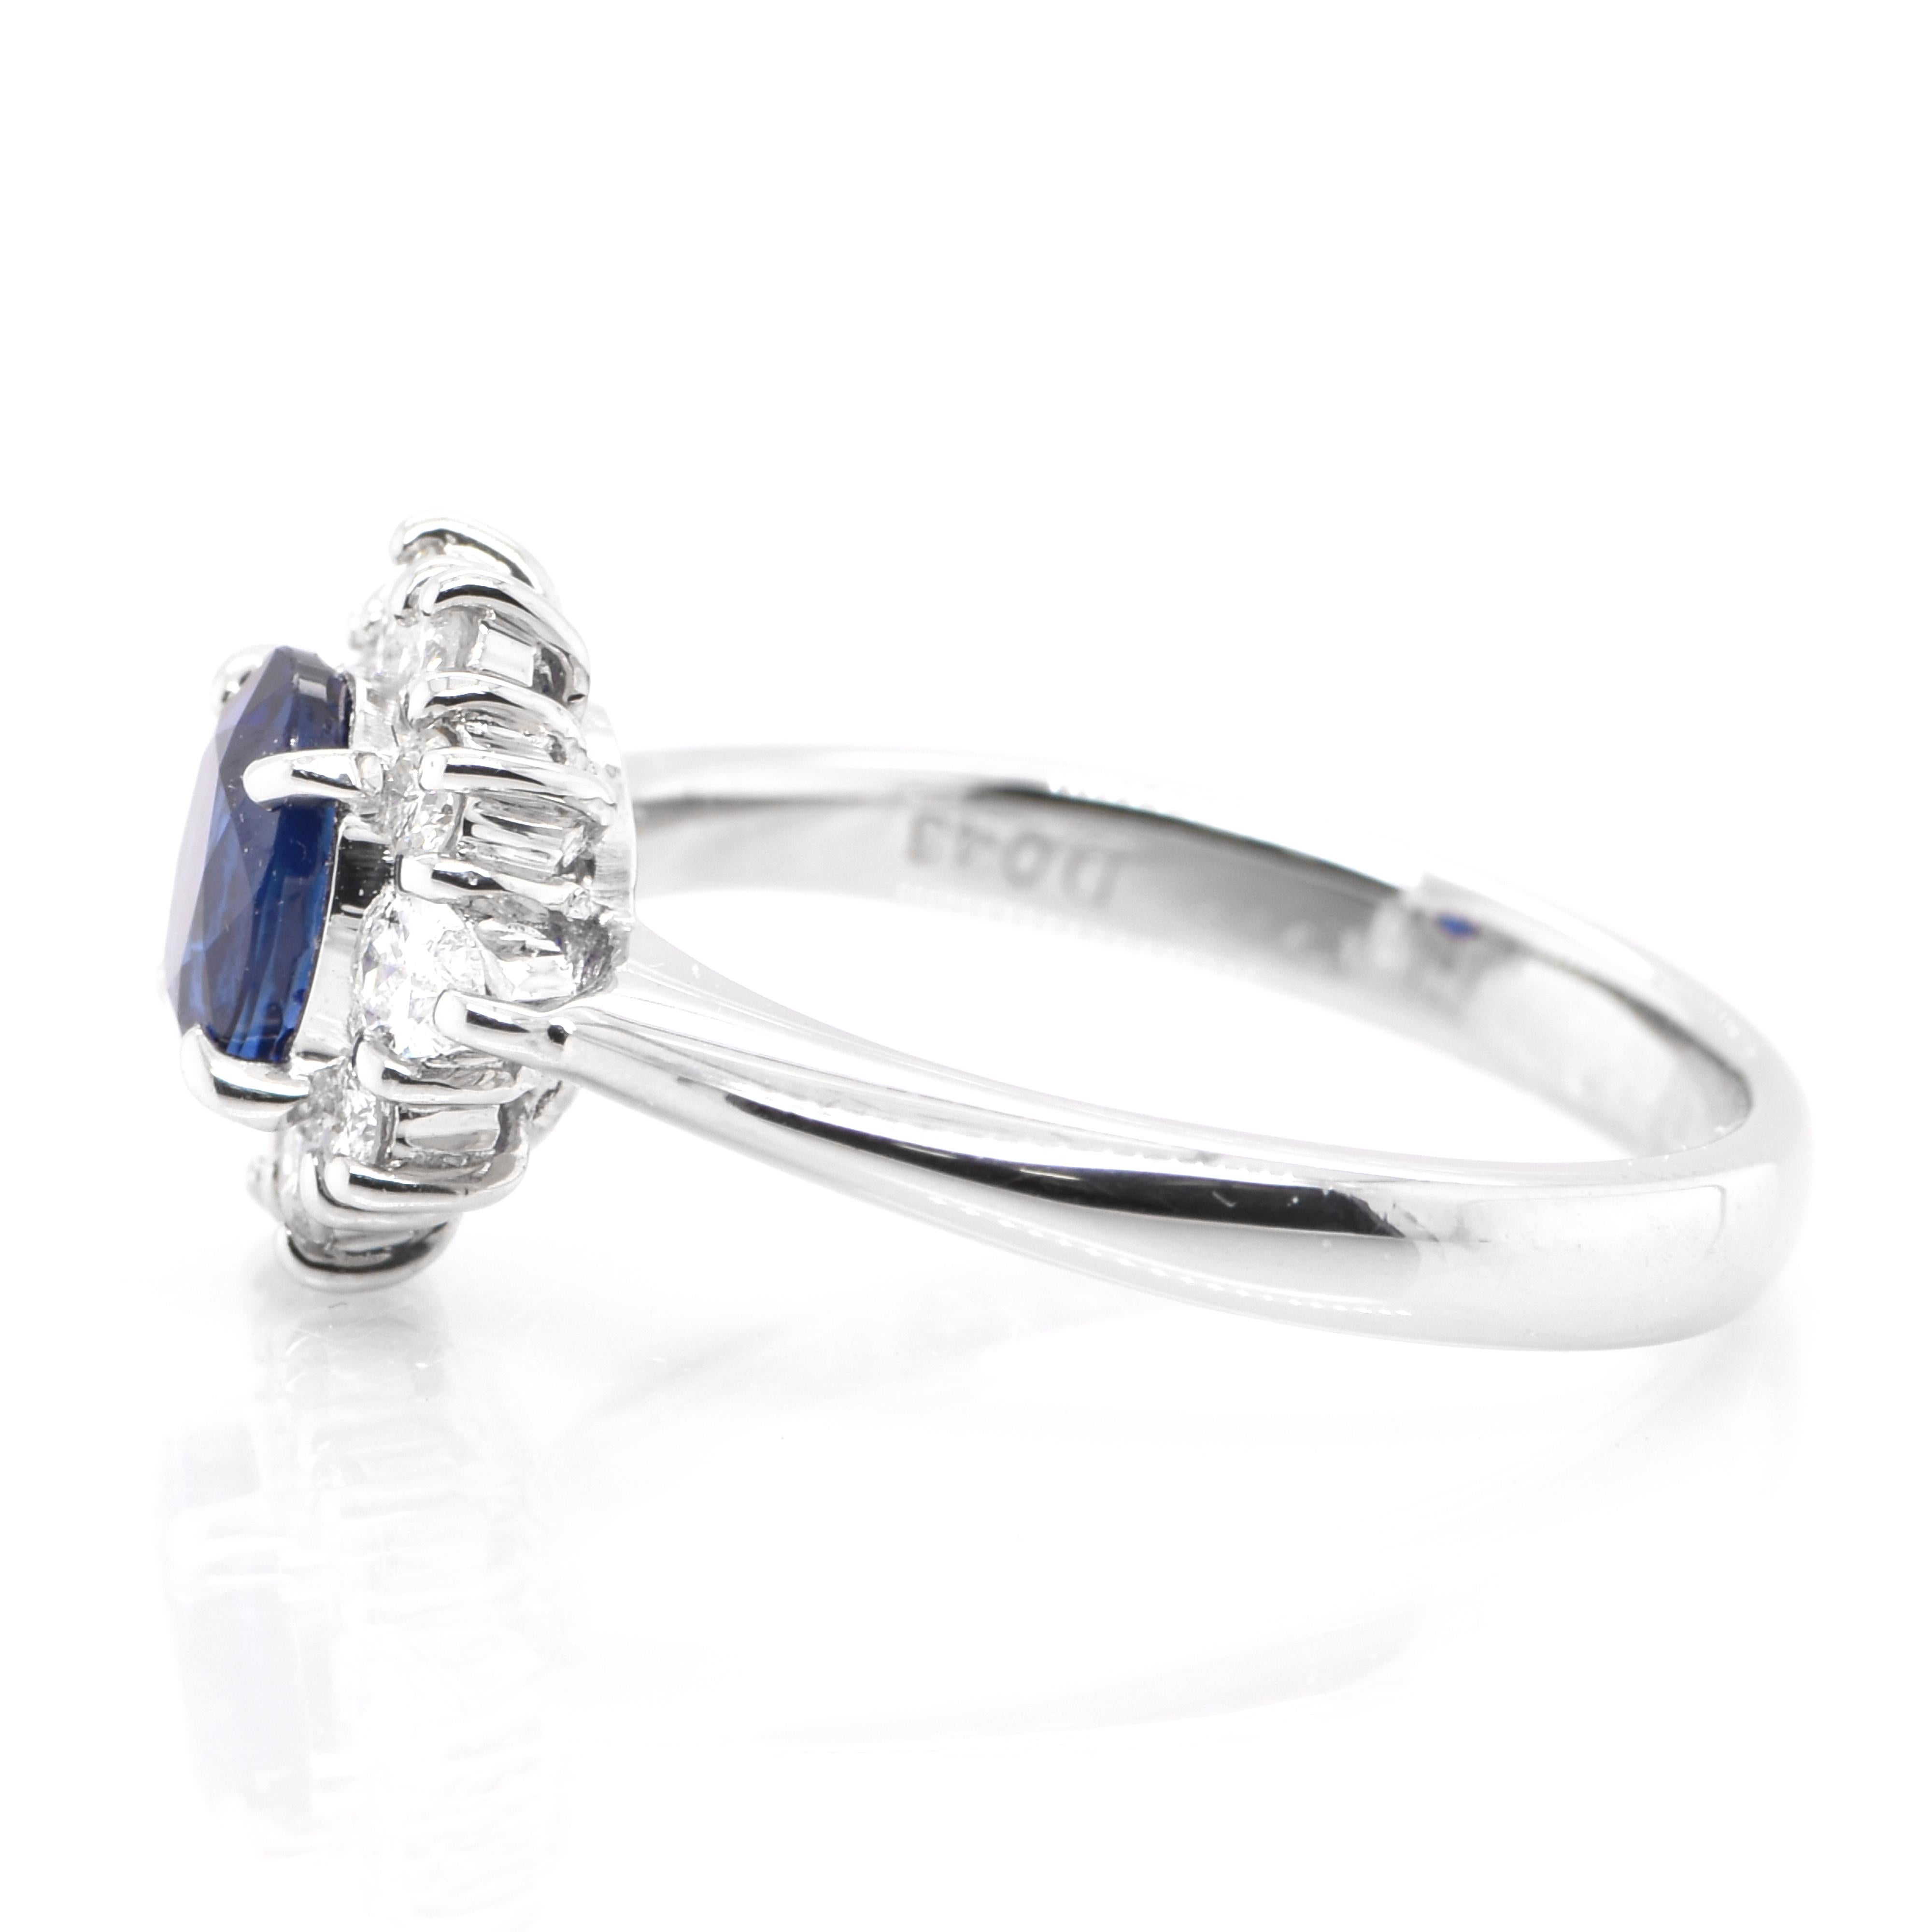 Oval Cut 1.17 Carat Natural Sapphire and Diamond Halo Ring Set in Platinum